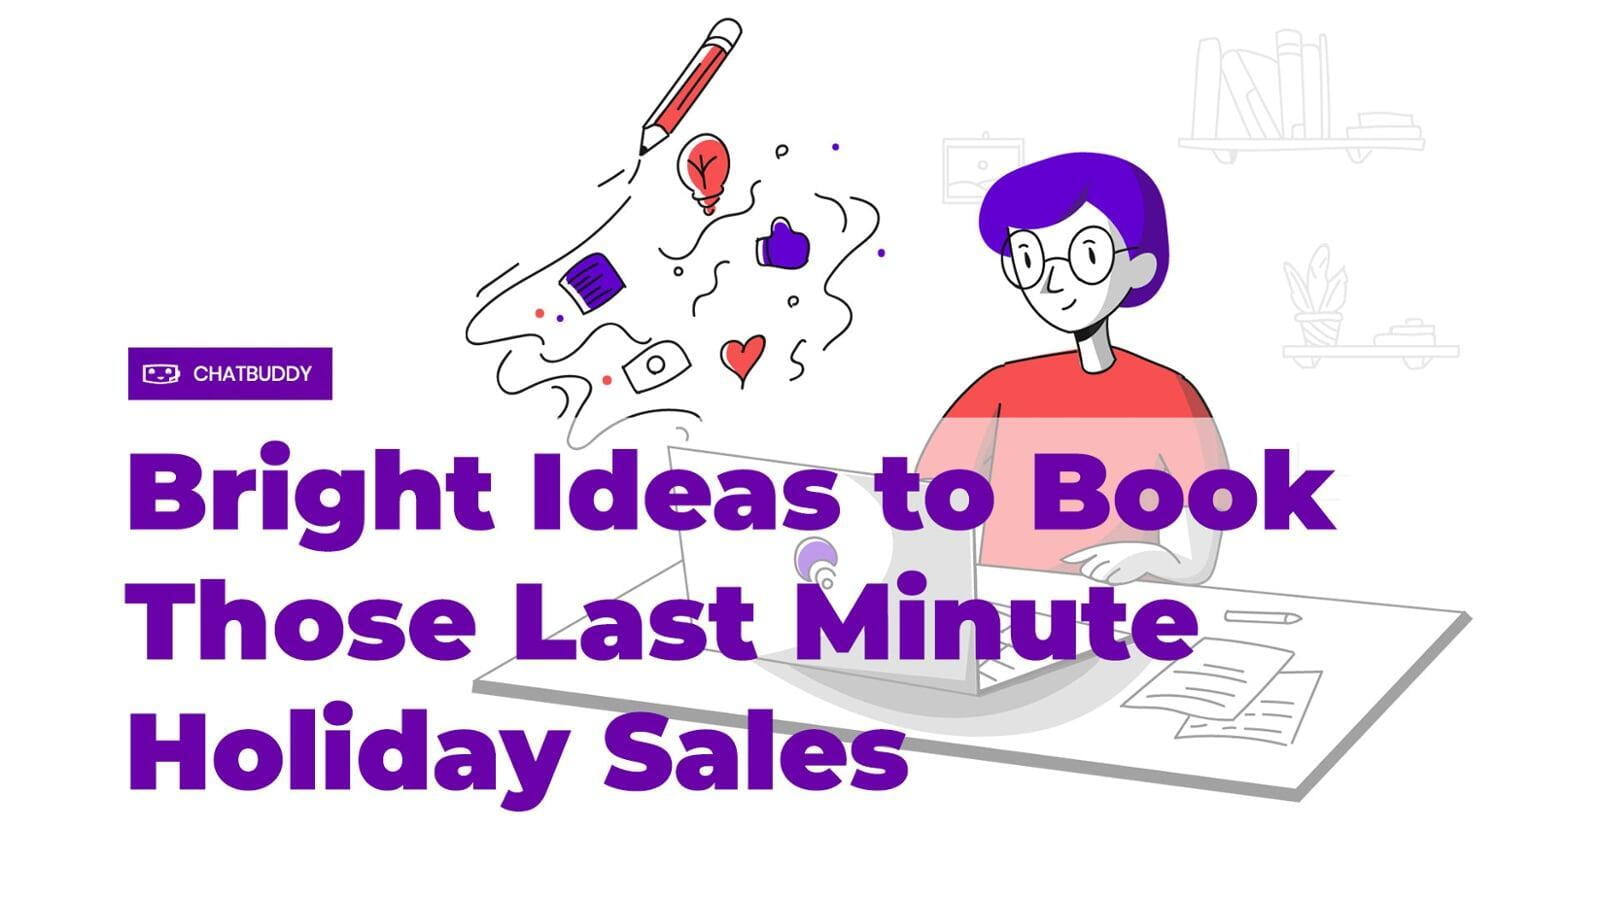 Bright Ideas to Book Those Last Minute Holiday Sales